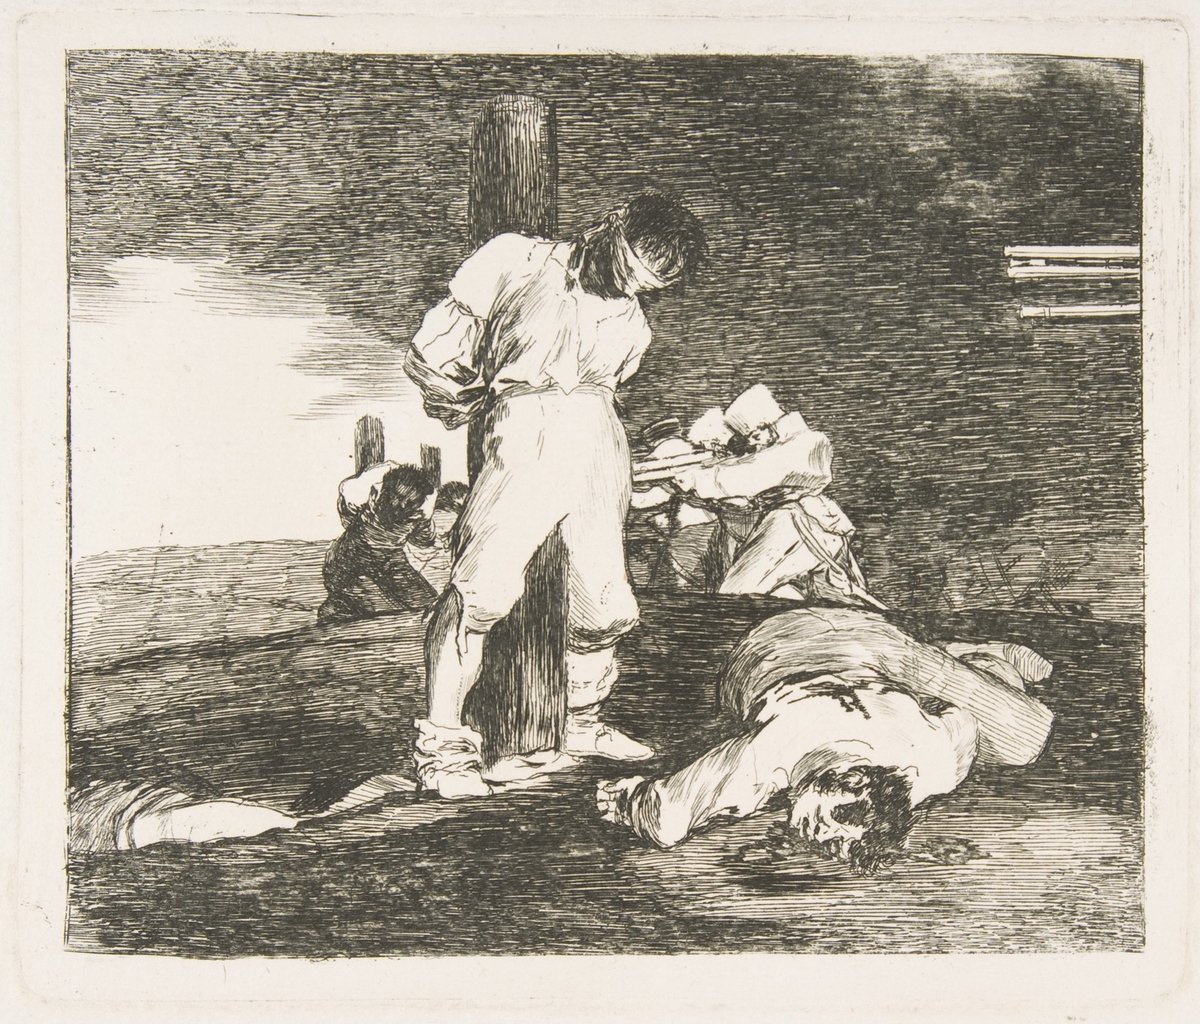 MY DAILY PIC is Francisco de Goya's 1810 “And There Is No Help,” now in his @metmuseum show. This print is made great by the gun barrels barely coming in from the right. They throw the print’s composition wildly out of balance.  As they should.
More at https://t.co/hnG9dk5wpQ https://t.co/GOniiuJCCz